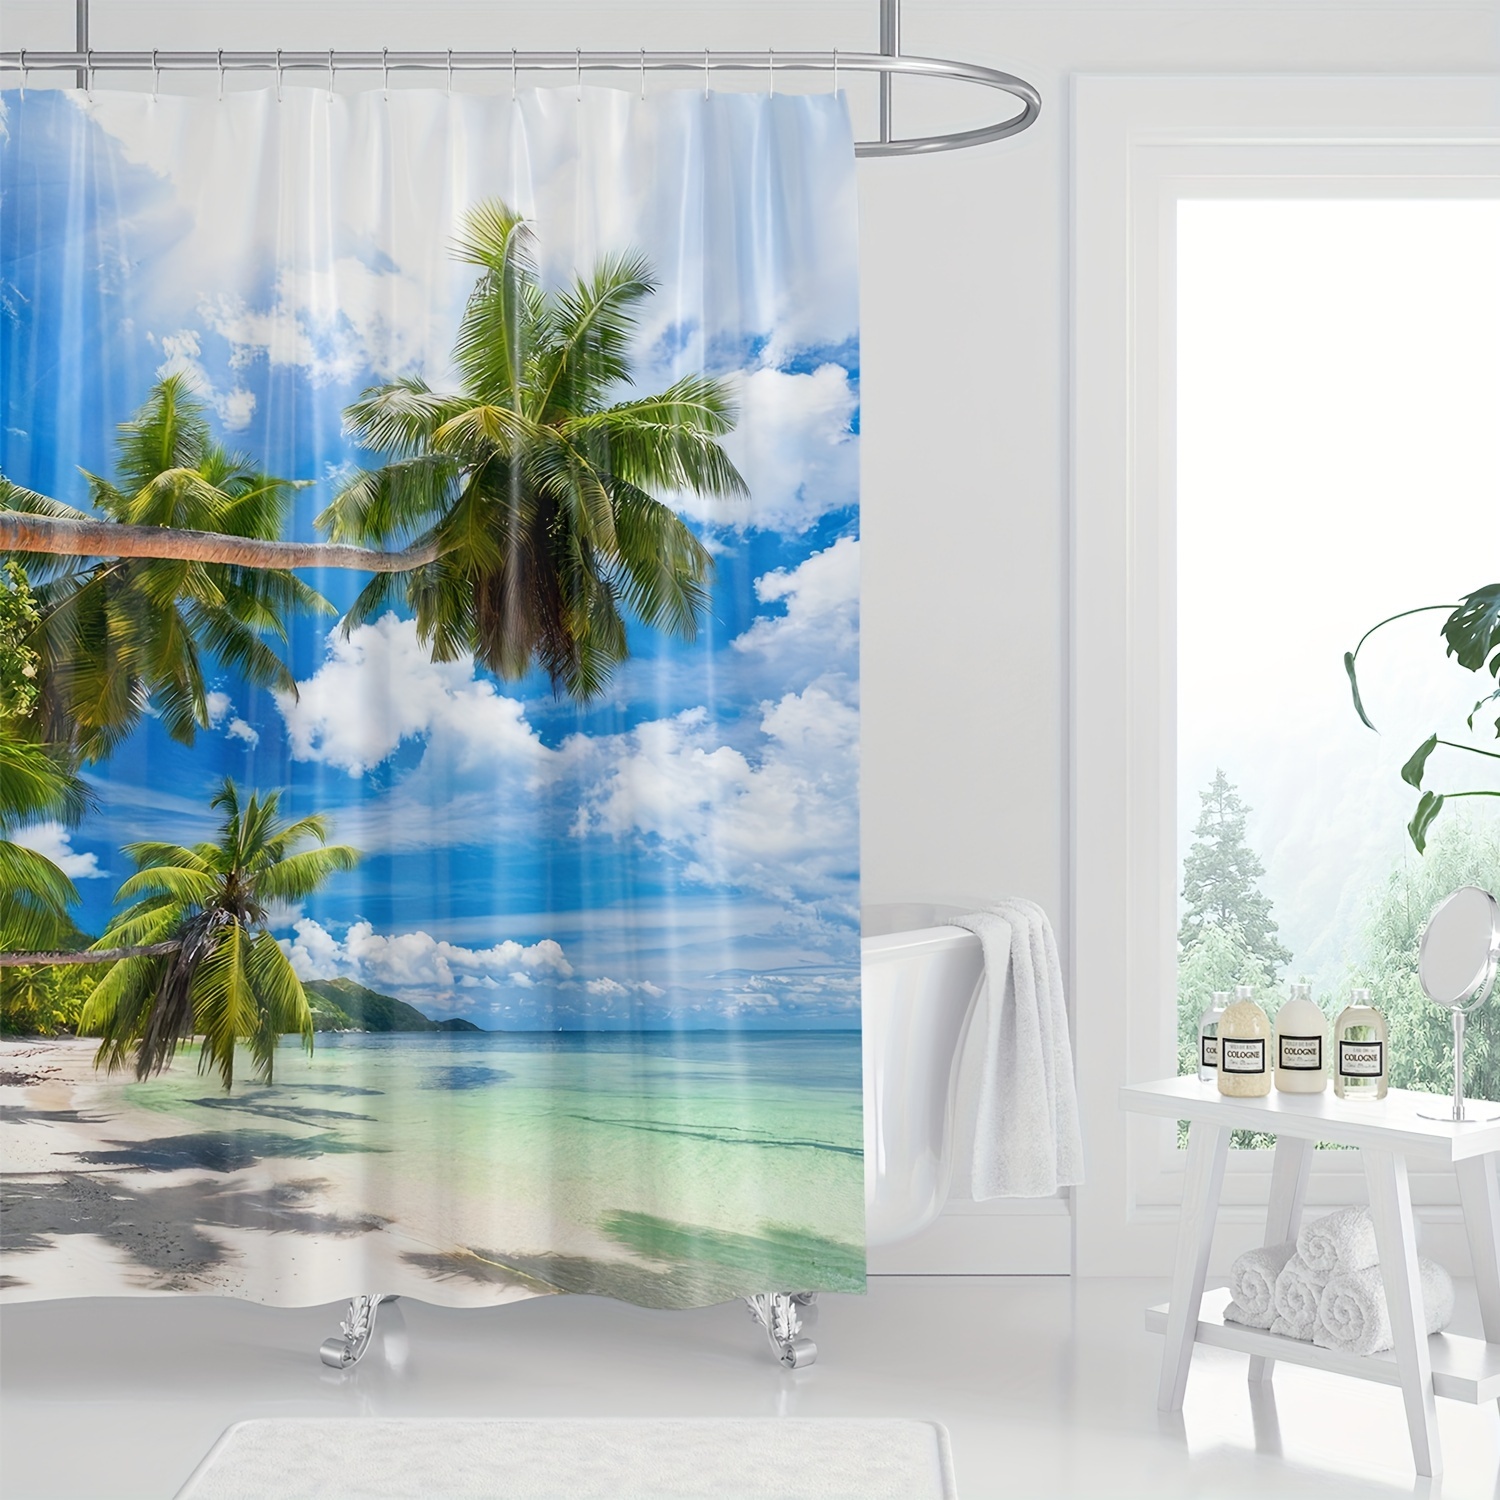 

Tropical Island Beach Scenery Digital Print Shower Curtain With Hooks - Water-resistant Polyester Bath Curtain, Machine Washable, All-season, Arts-themed, Knit Weave, Includes Hooks - 1pc